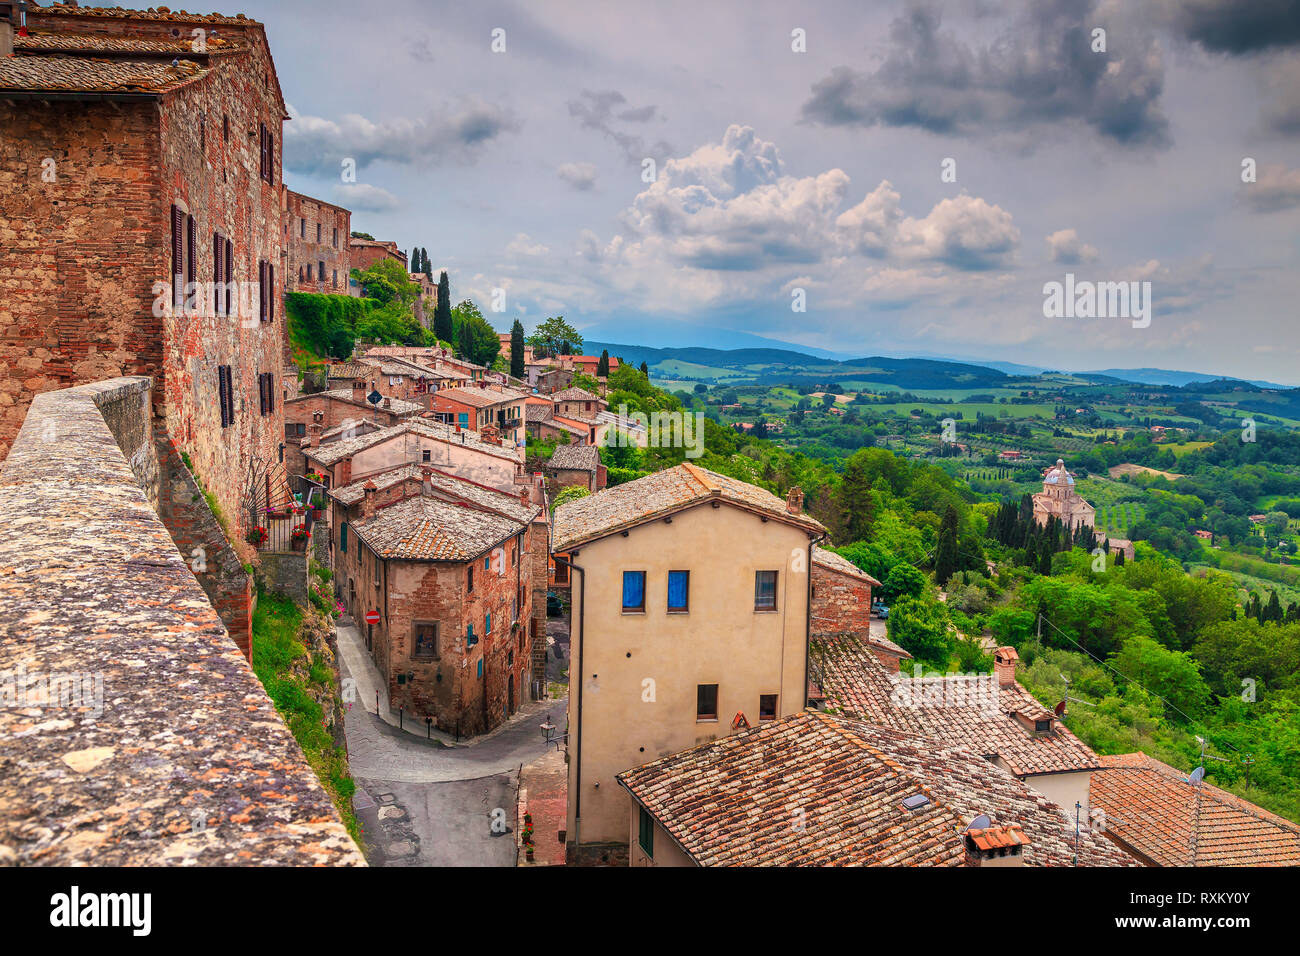 Famous travel and touristic location. Breathtaking Tuscany landscape seen from the walls of Montepulciano, Italy, Europe Stock Photo